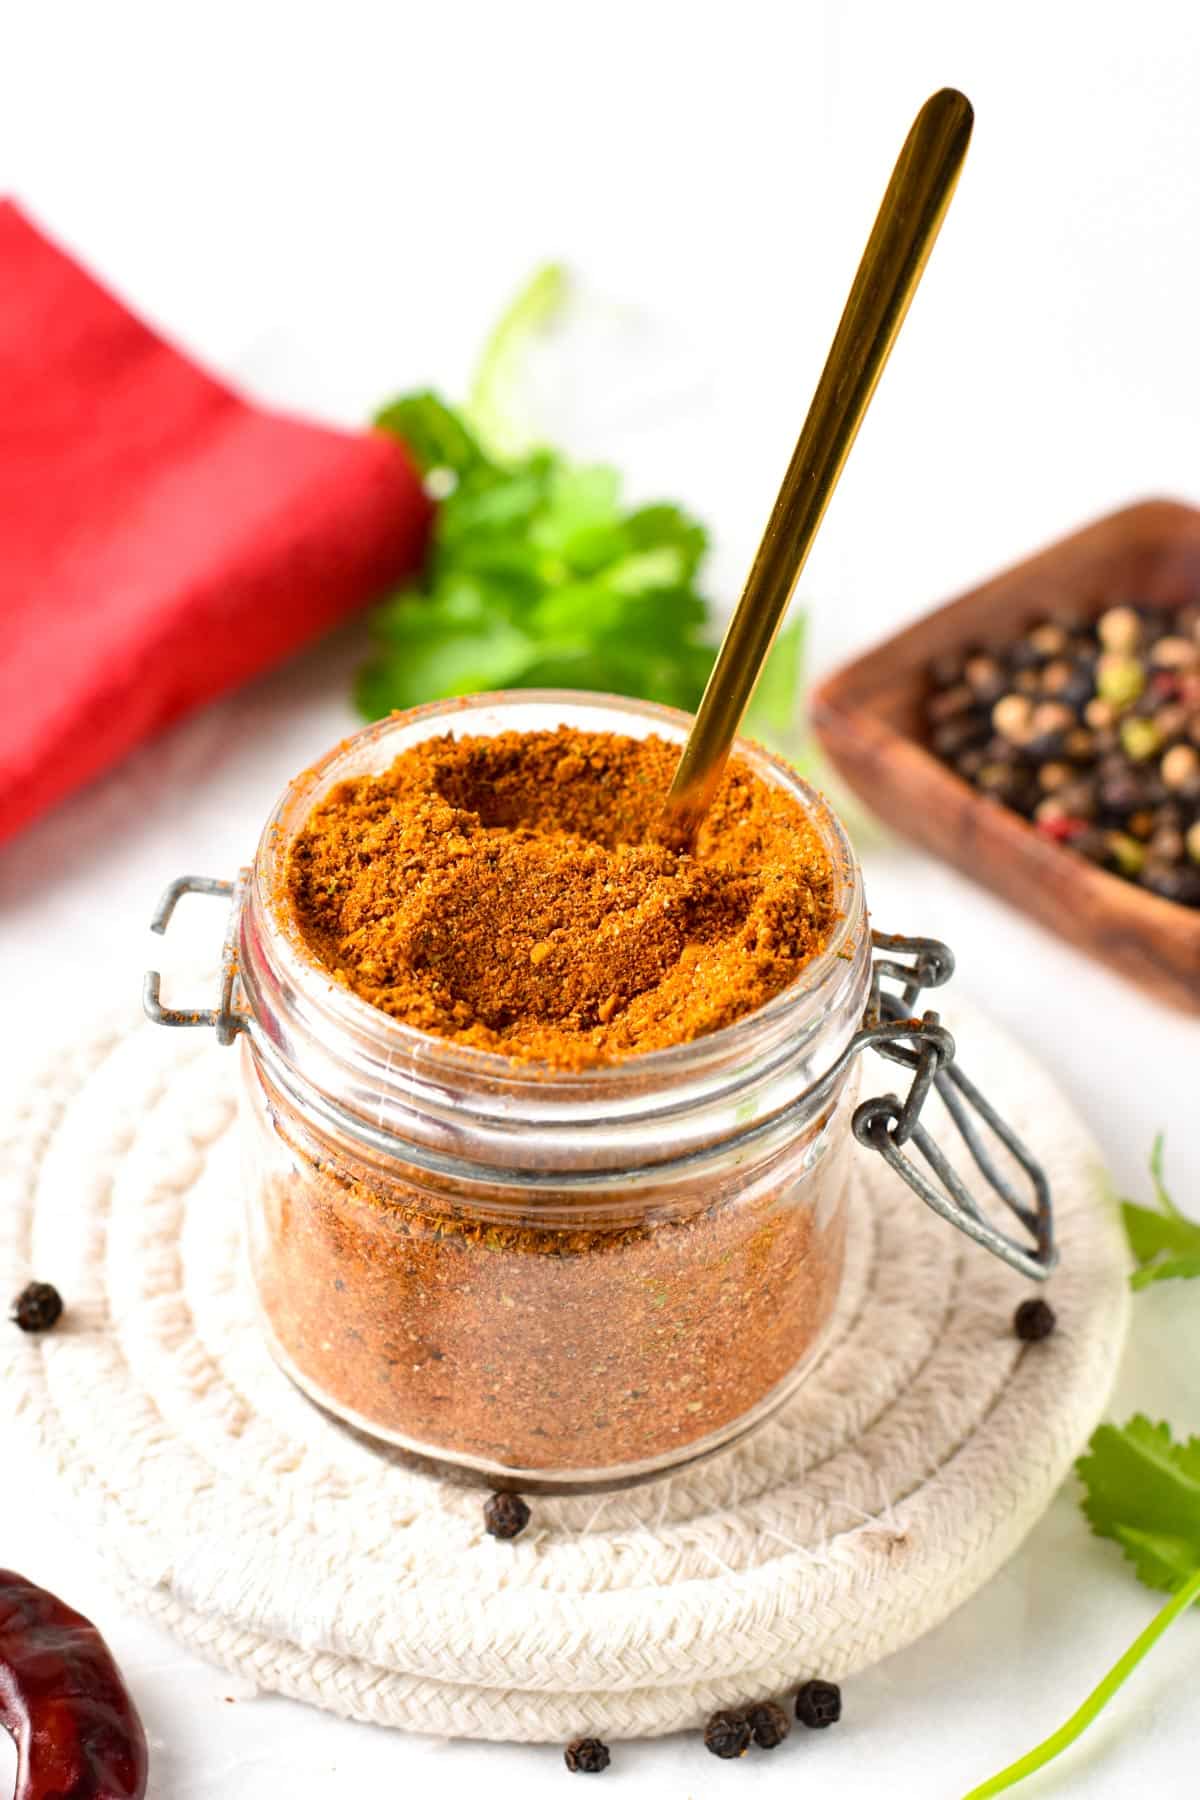 Learn how to make a Low Sodium Taco Seasoning season all kinds of food from chicken to beef or vegetables for your taco night.